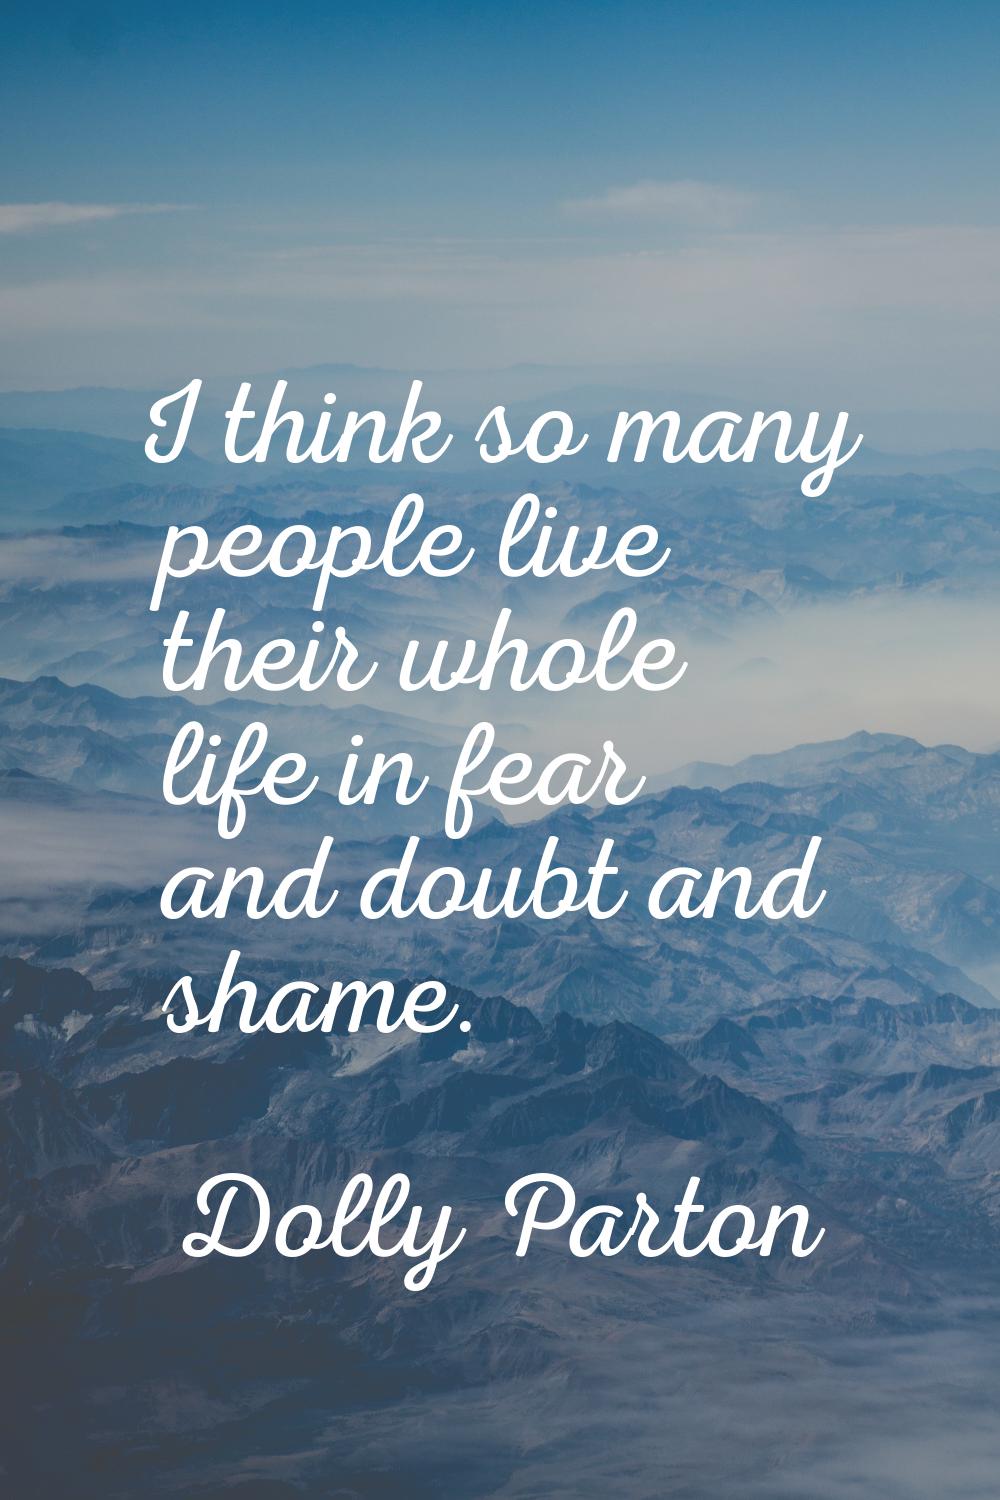 I think so many people live their whole life in fear and doubt and shame.